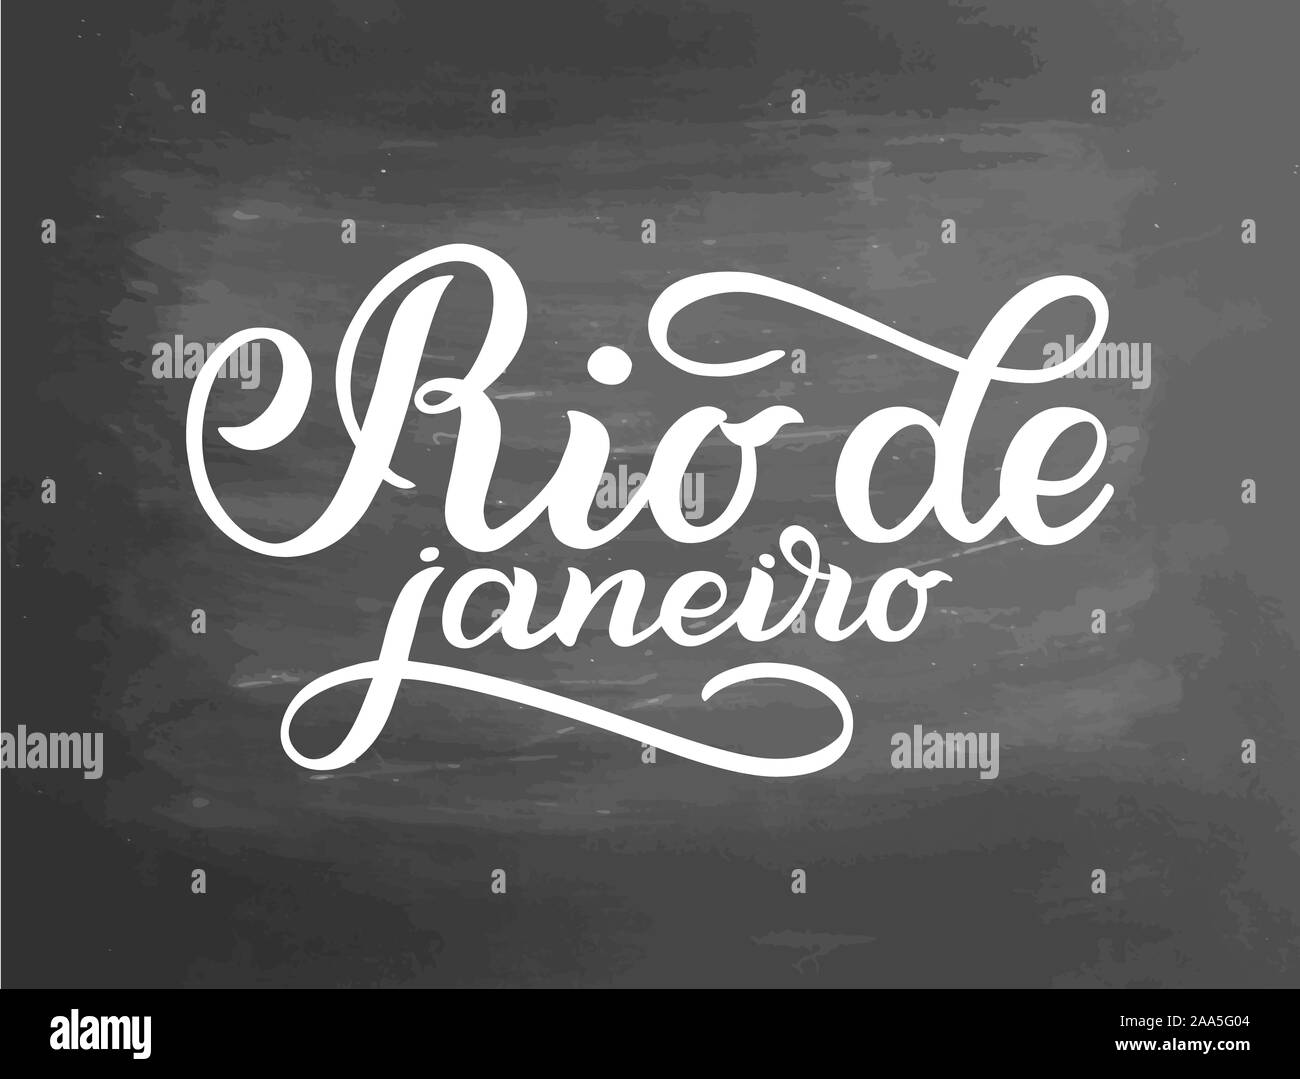 Abstract with text - Rio de janeiro. Vintage concept background, art template, logo, labels, layout, banner, card. Hand made typography word. Letterin Stock Photo